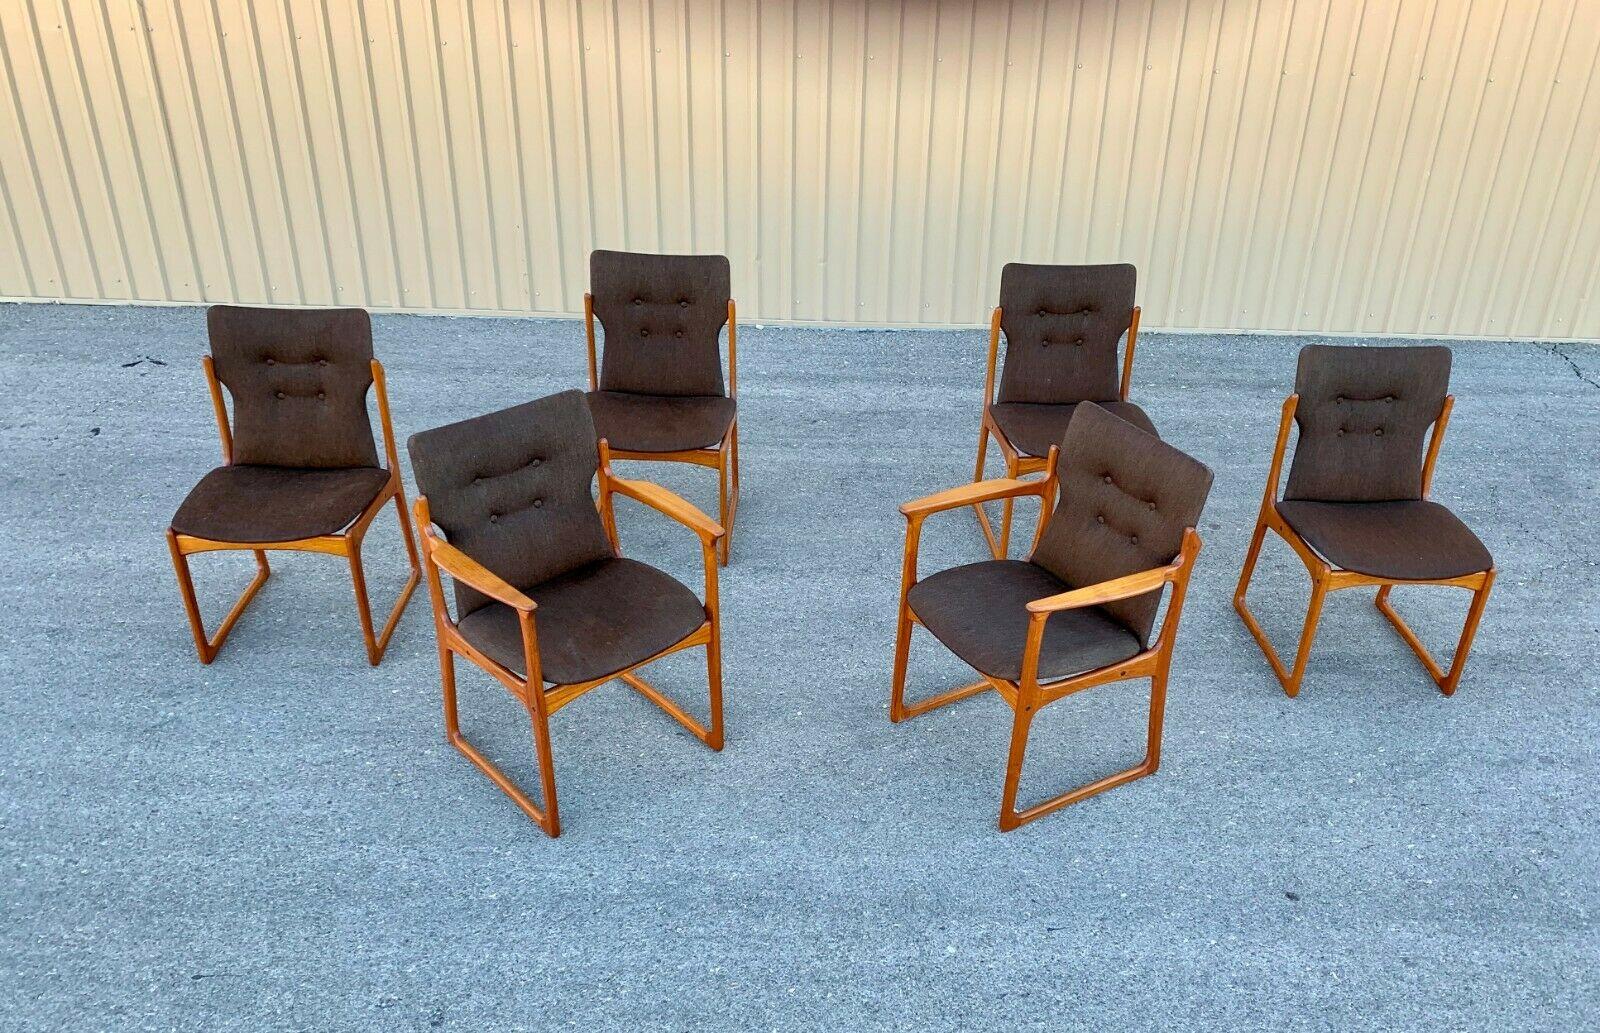 A gorgeous set of 6 teak dining chairs from the 1960s by Art Furn of Denmark. Beautifully grained and featuring stunning sculpted solid teak frames. 

Dimensions: 20